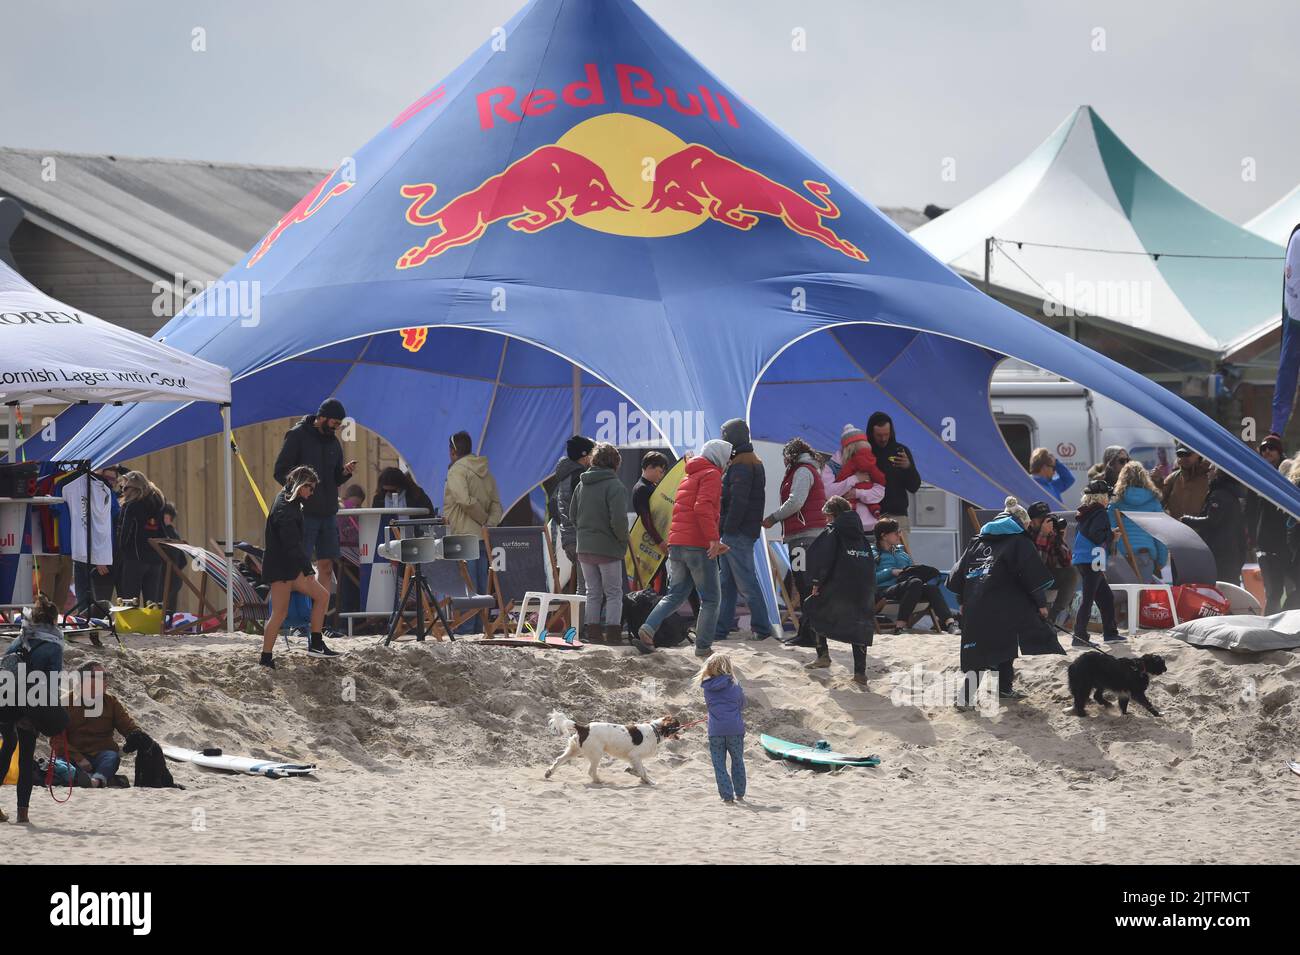 Red Bull Tent at surfing event in Cornwall Alamy